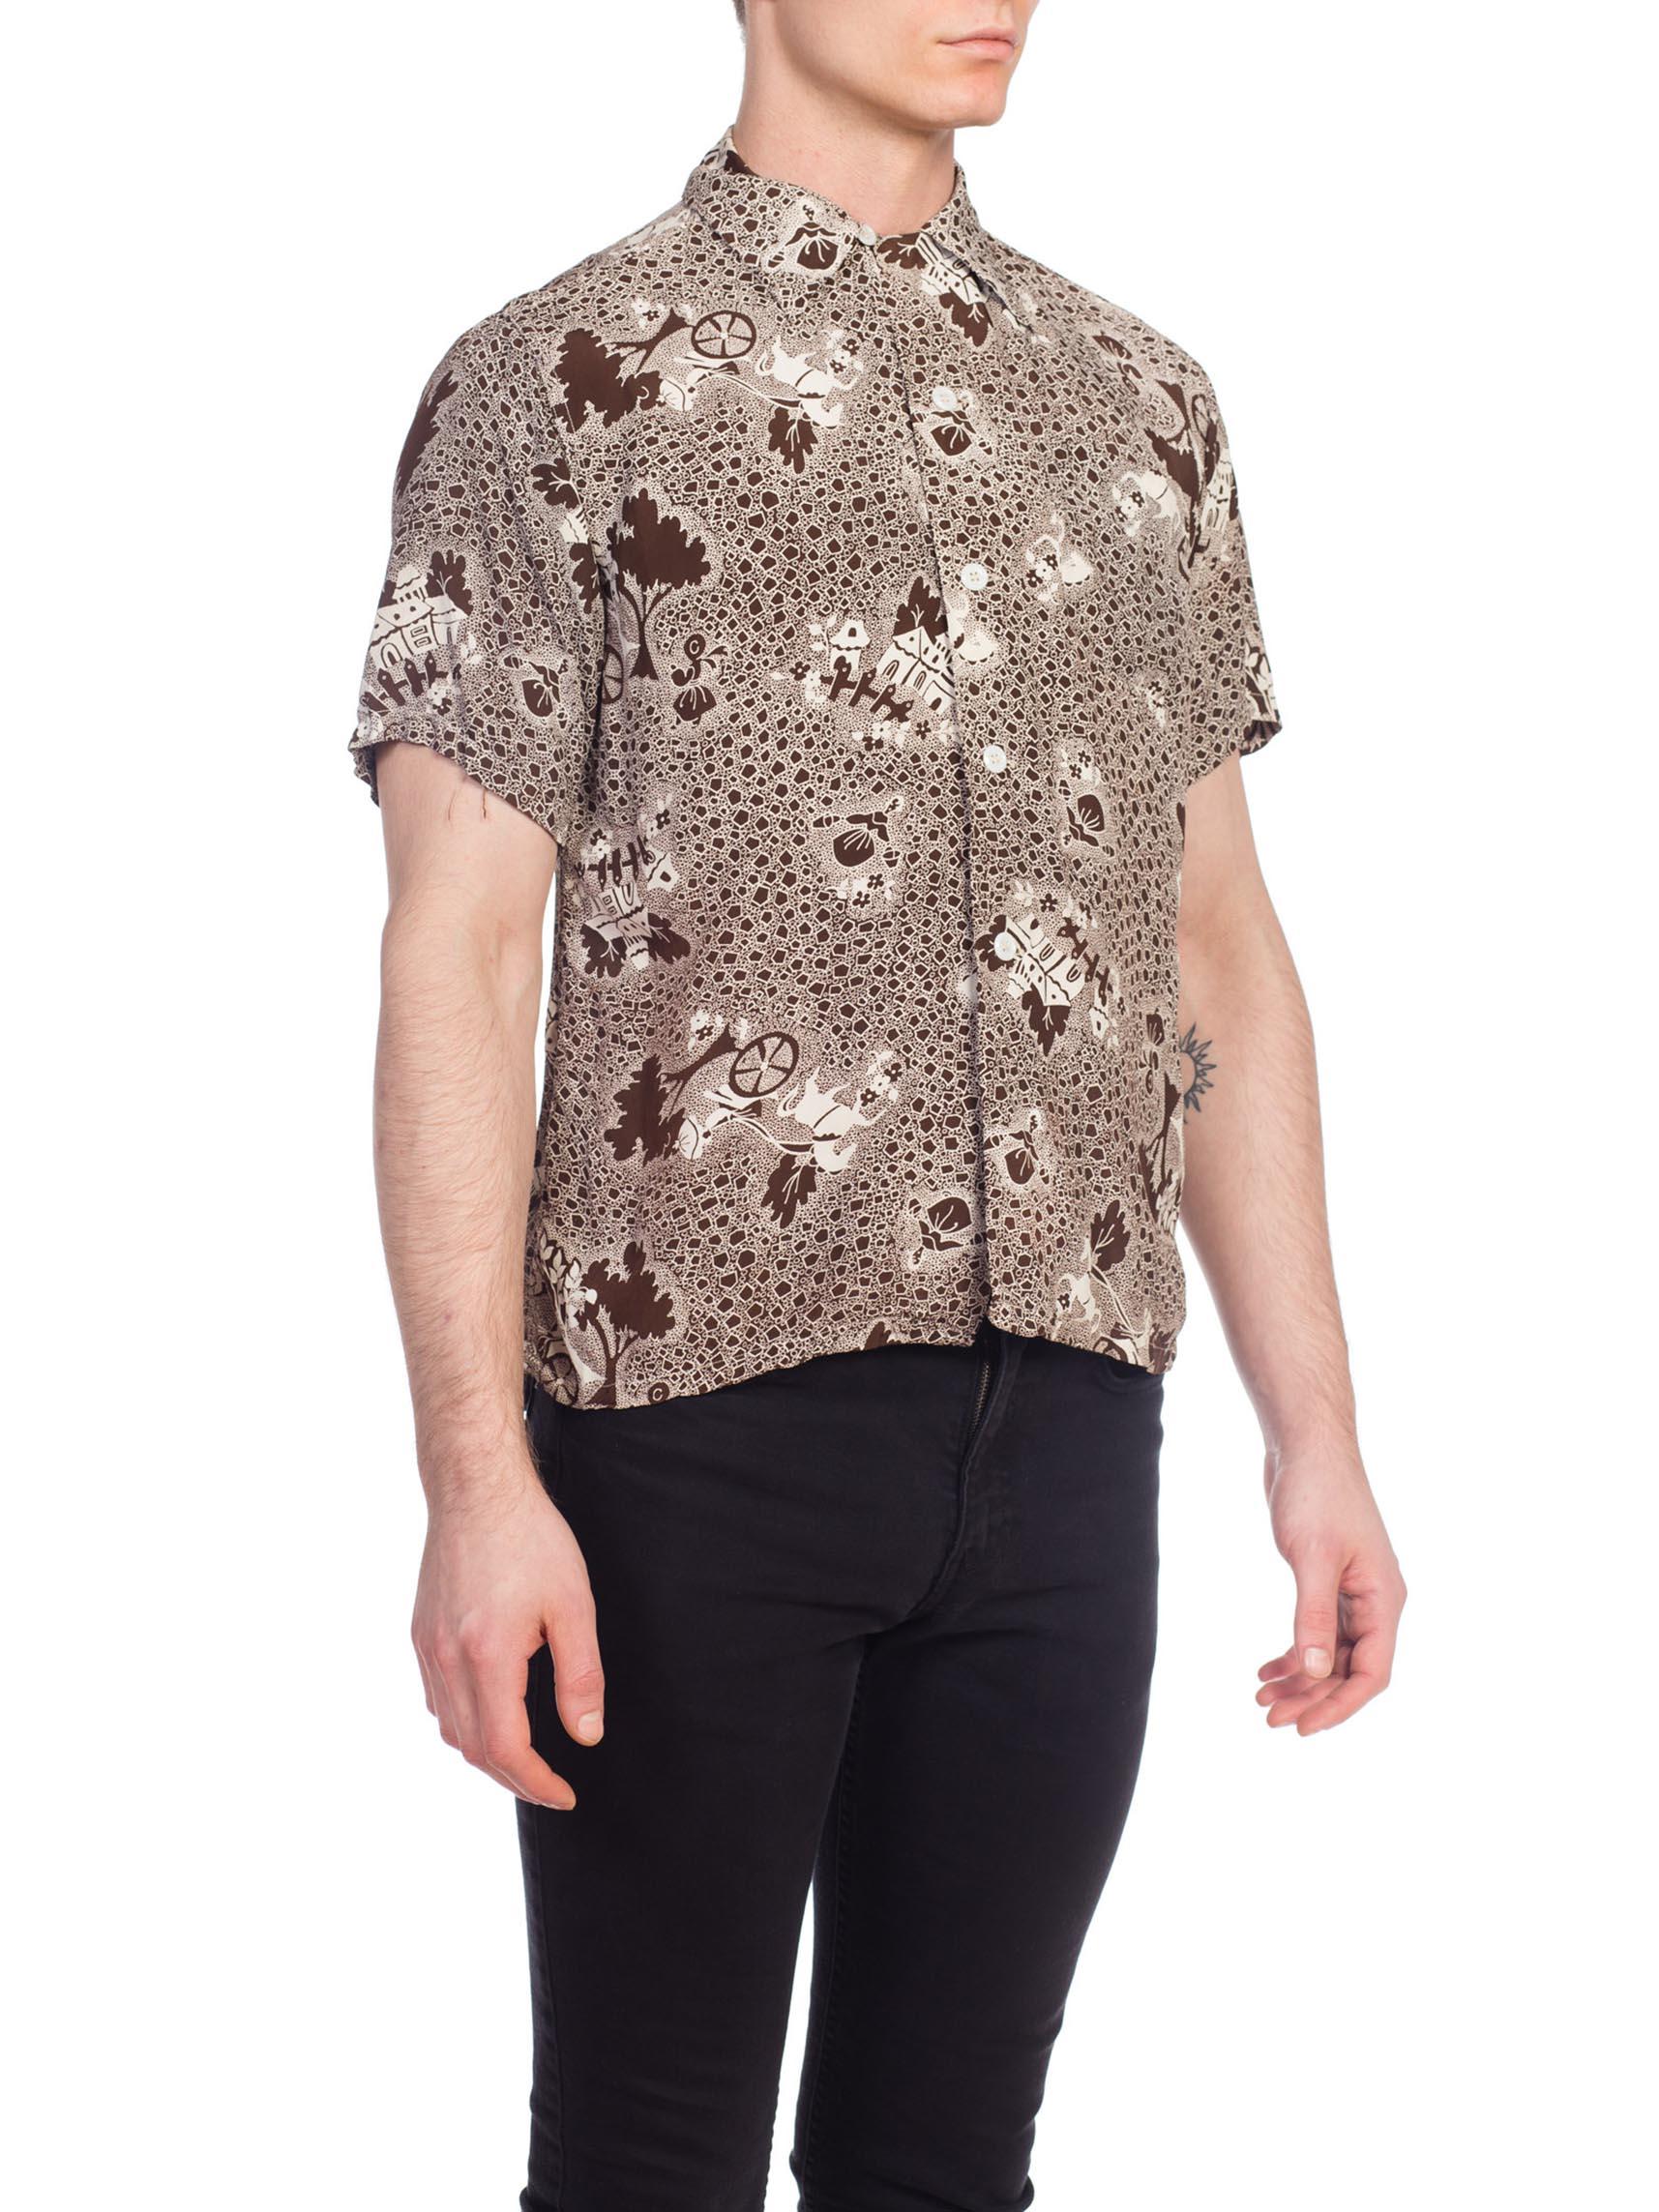 1940S White & Brown Rayon Men's Scenic Fantasy Conversational Print Shirt For Sale 2